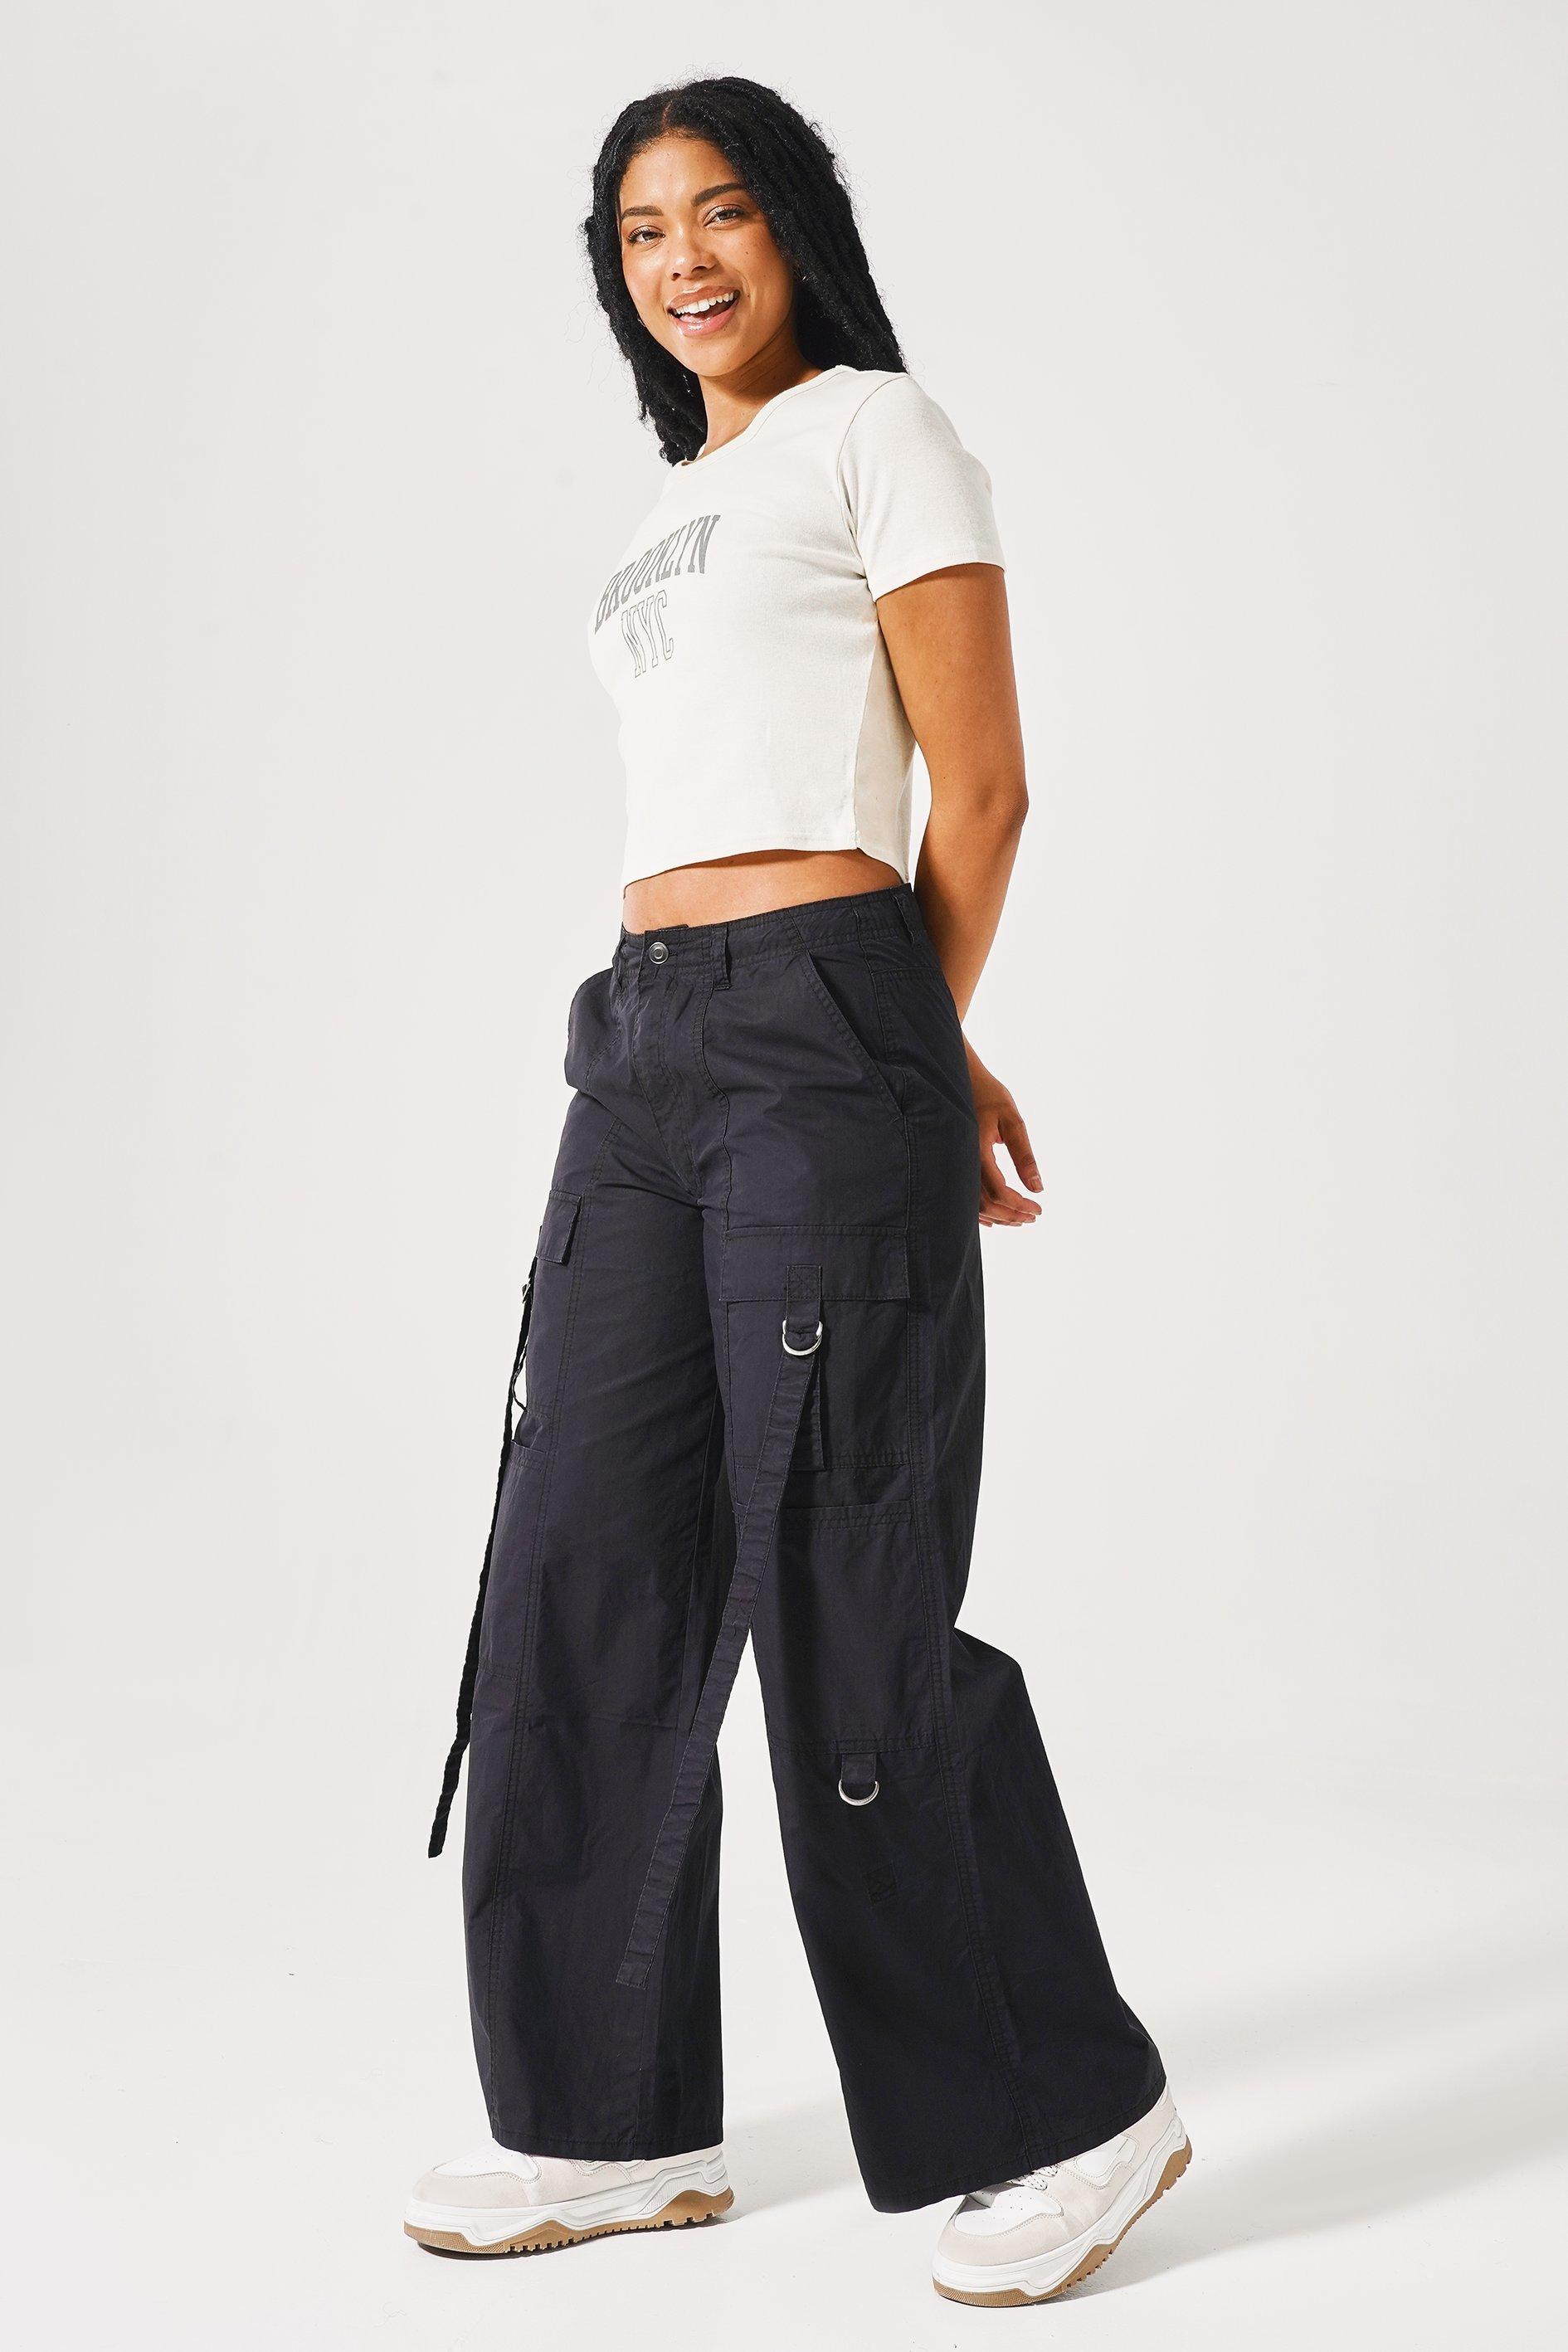 Jewel Sweater Pant – KNOWN SUPPLY